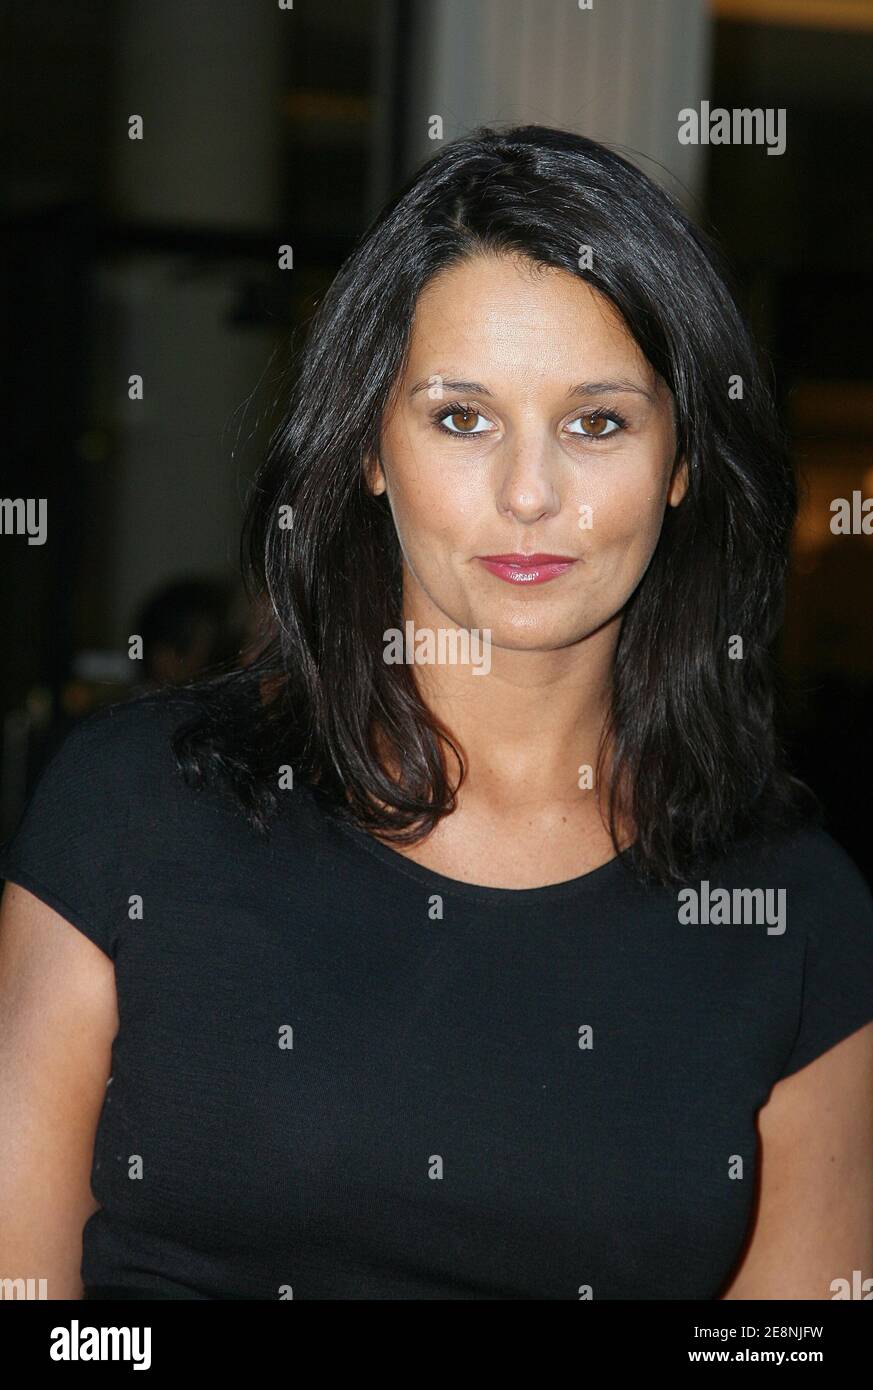 TV presenter Faustine Bollaert attends the annual press conference of France televisions held at the Salle Pleyel in Paris, France on August 30, 2007. Photo by Gorassini-Guignebourg/ABACAPRESS.COM Stock Photo